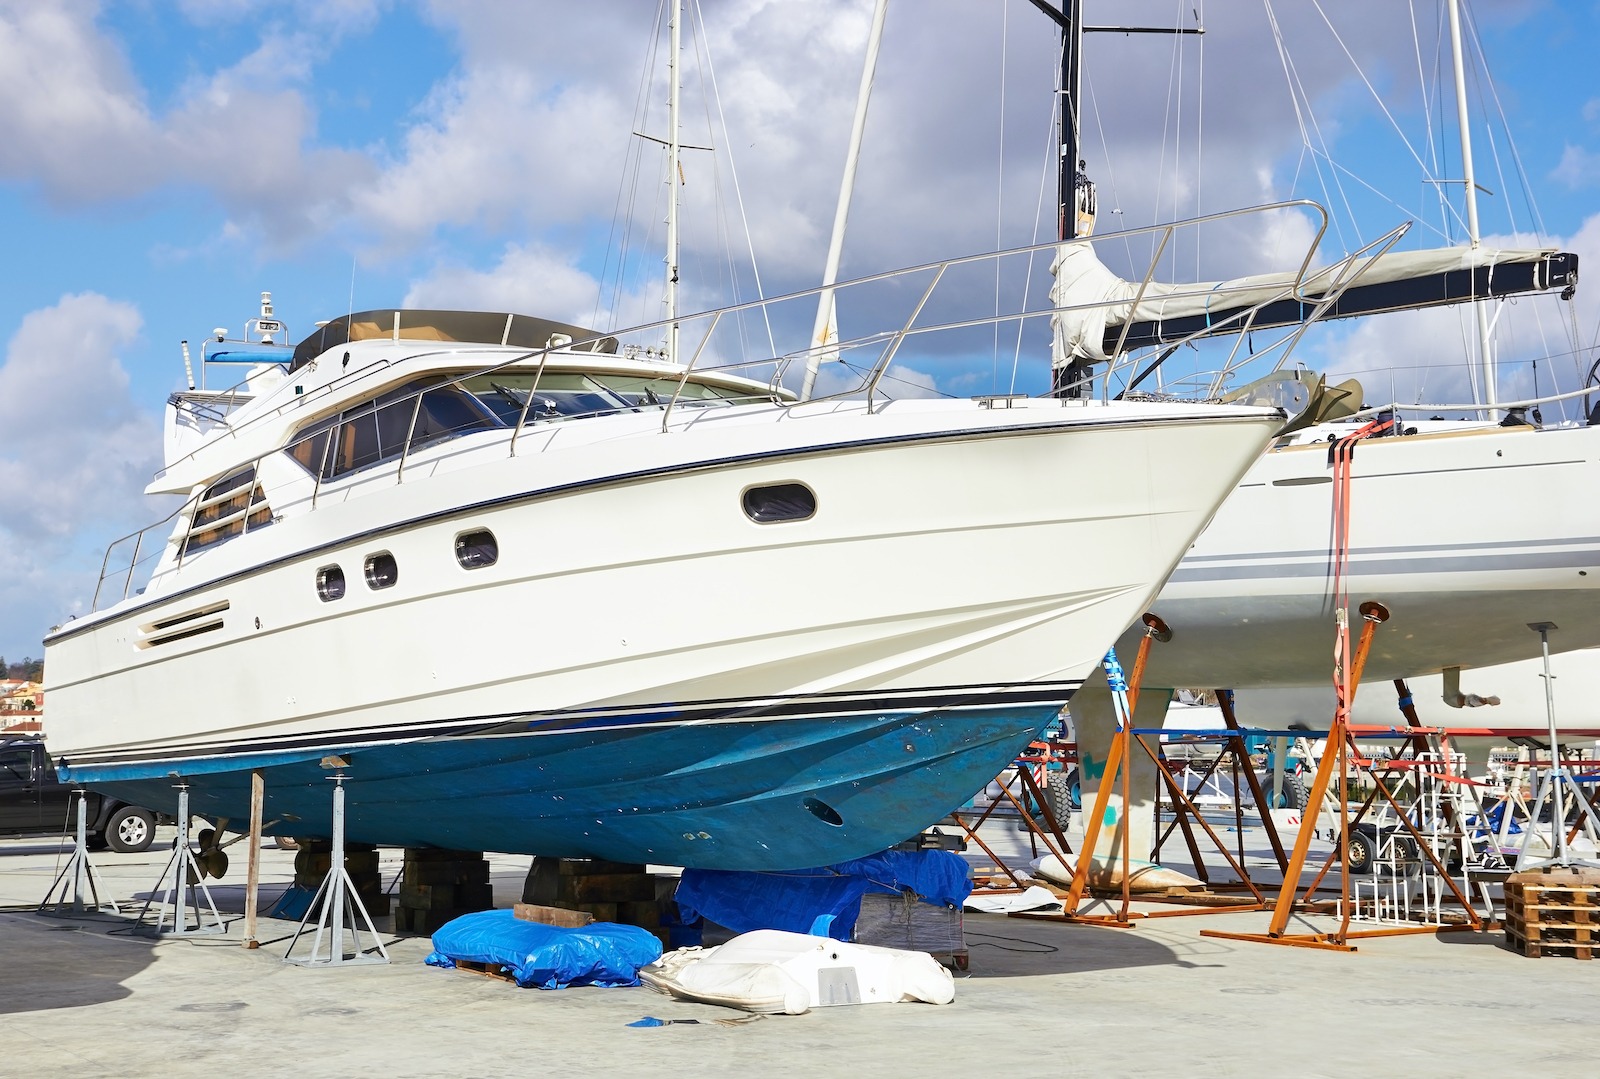 Kappler's Marine Detailing and Boat Repair: Setting Sail Towards Excellence